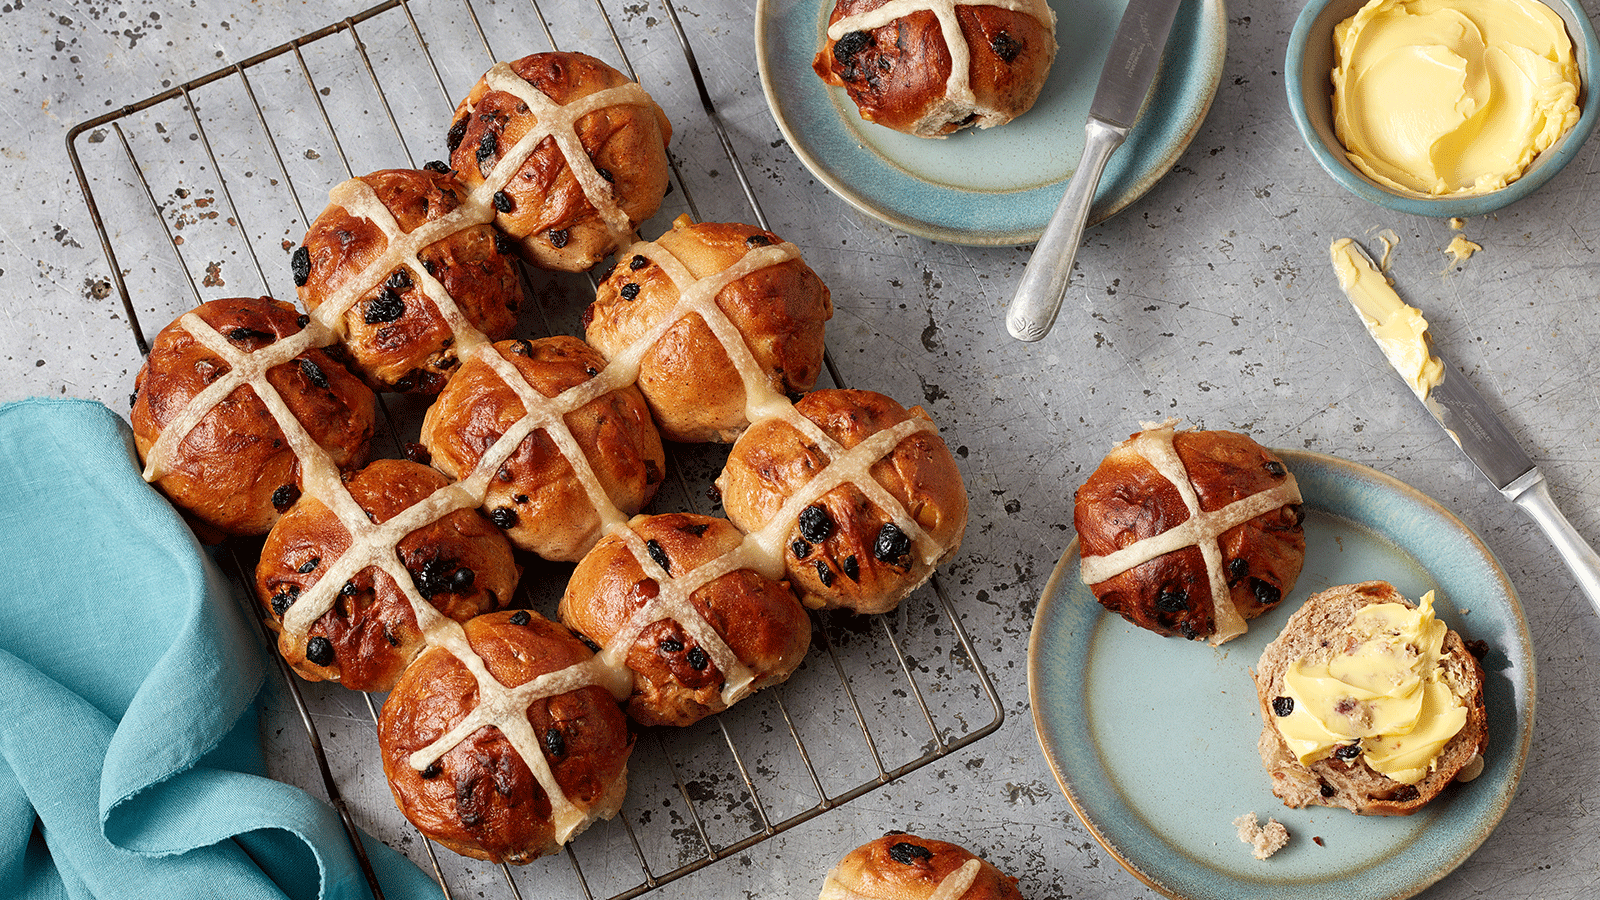 I love hot cross buns - they go on sale here the day after Christmas